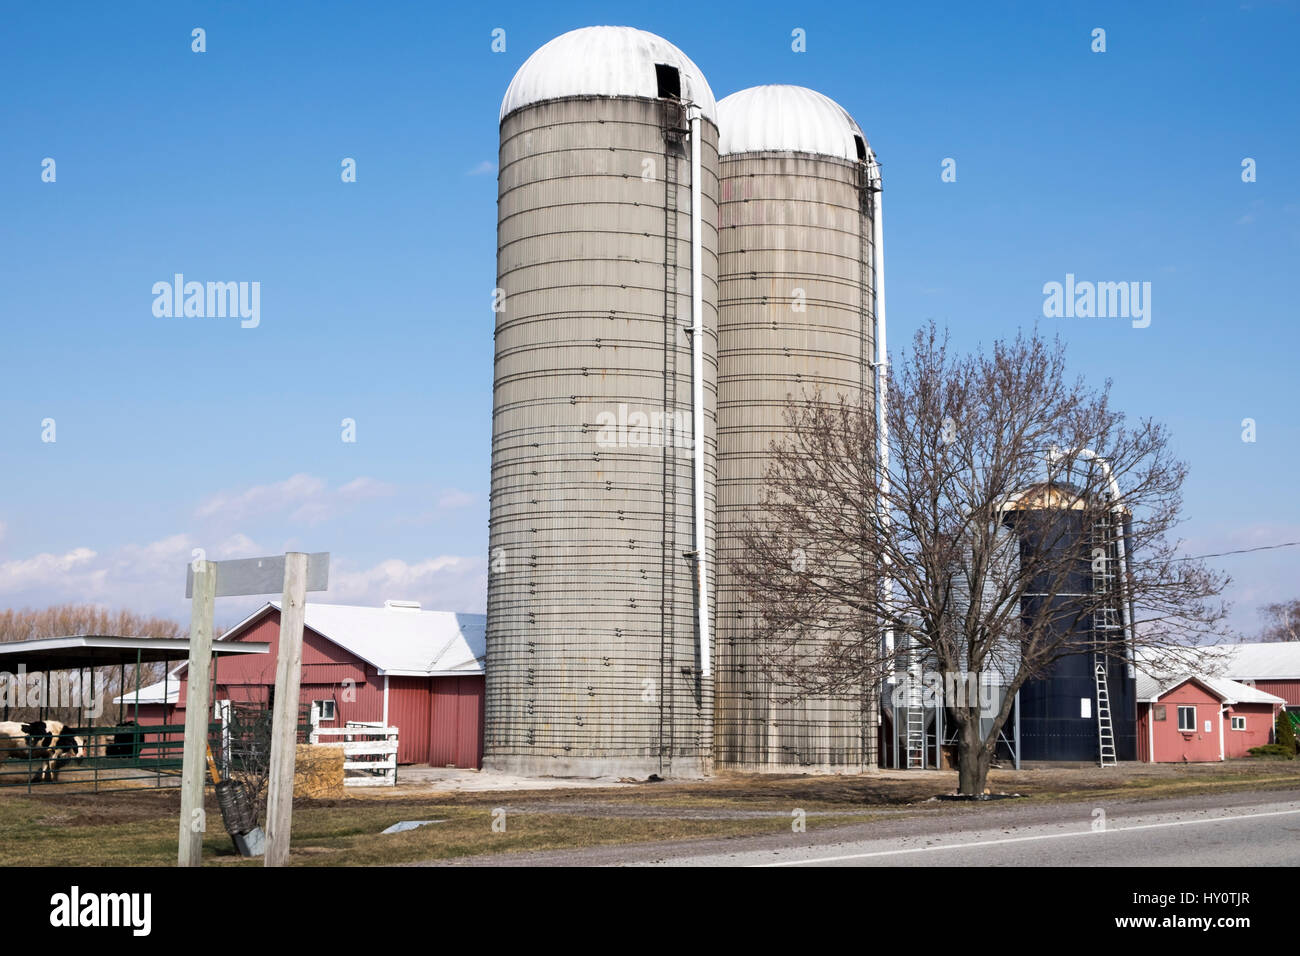 Two tall silos with white tops and ladders on the exterior are held together by metal bands on a farm in rural Ontario Canada. Stock Photo